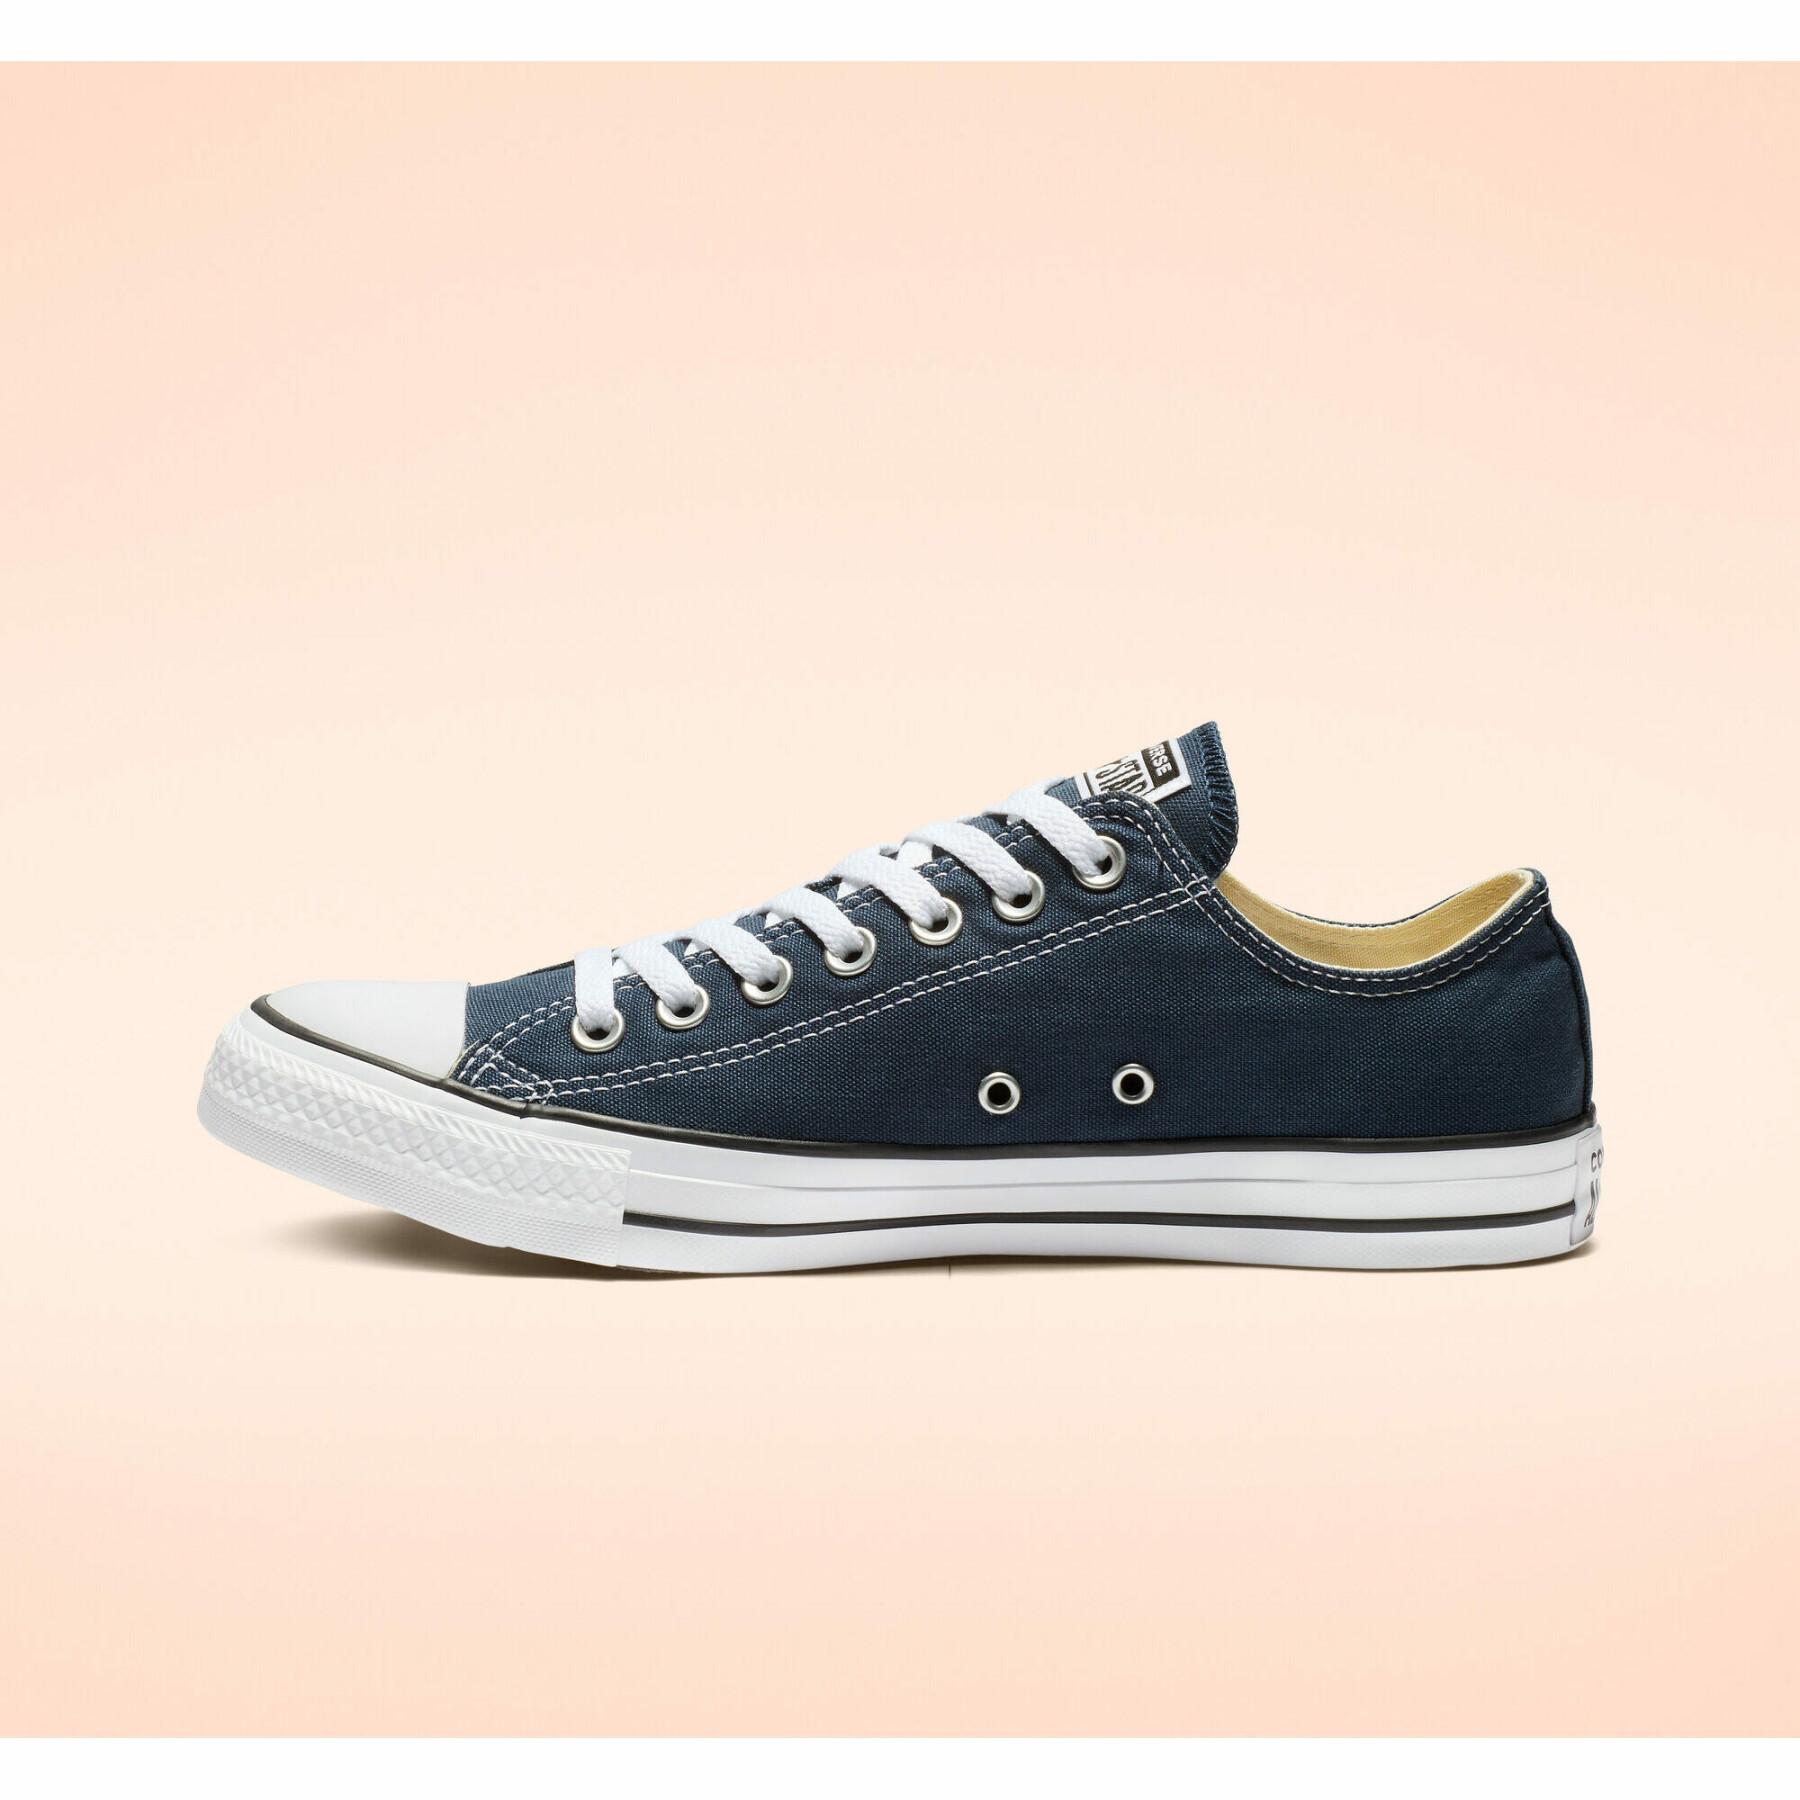 Sneakers Converse Chuck Taylor All Star classic - Other - Sneakers -  Lifestyle